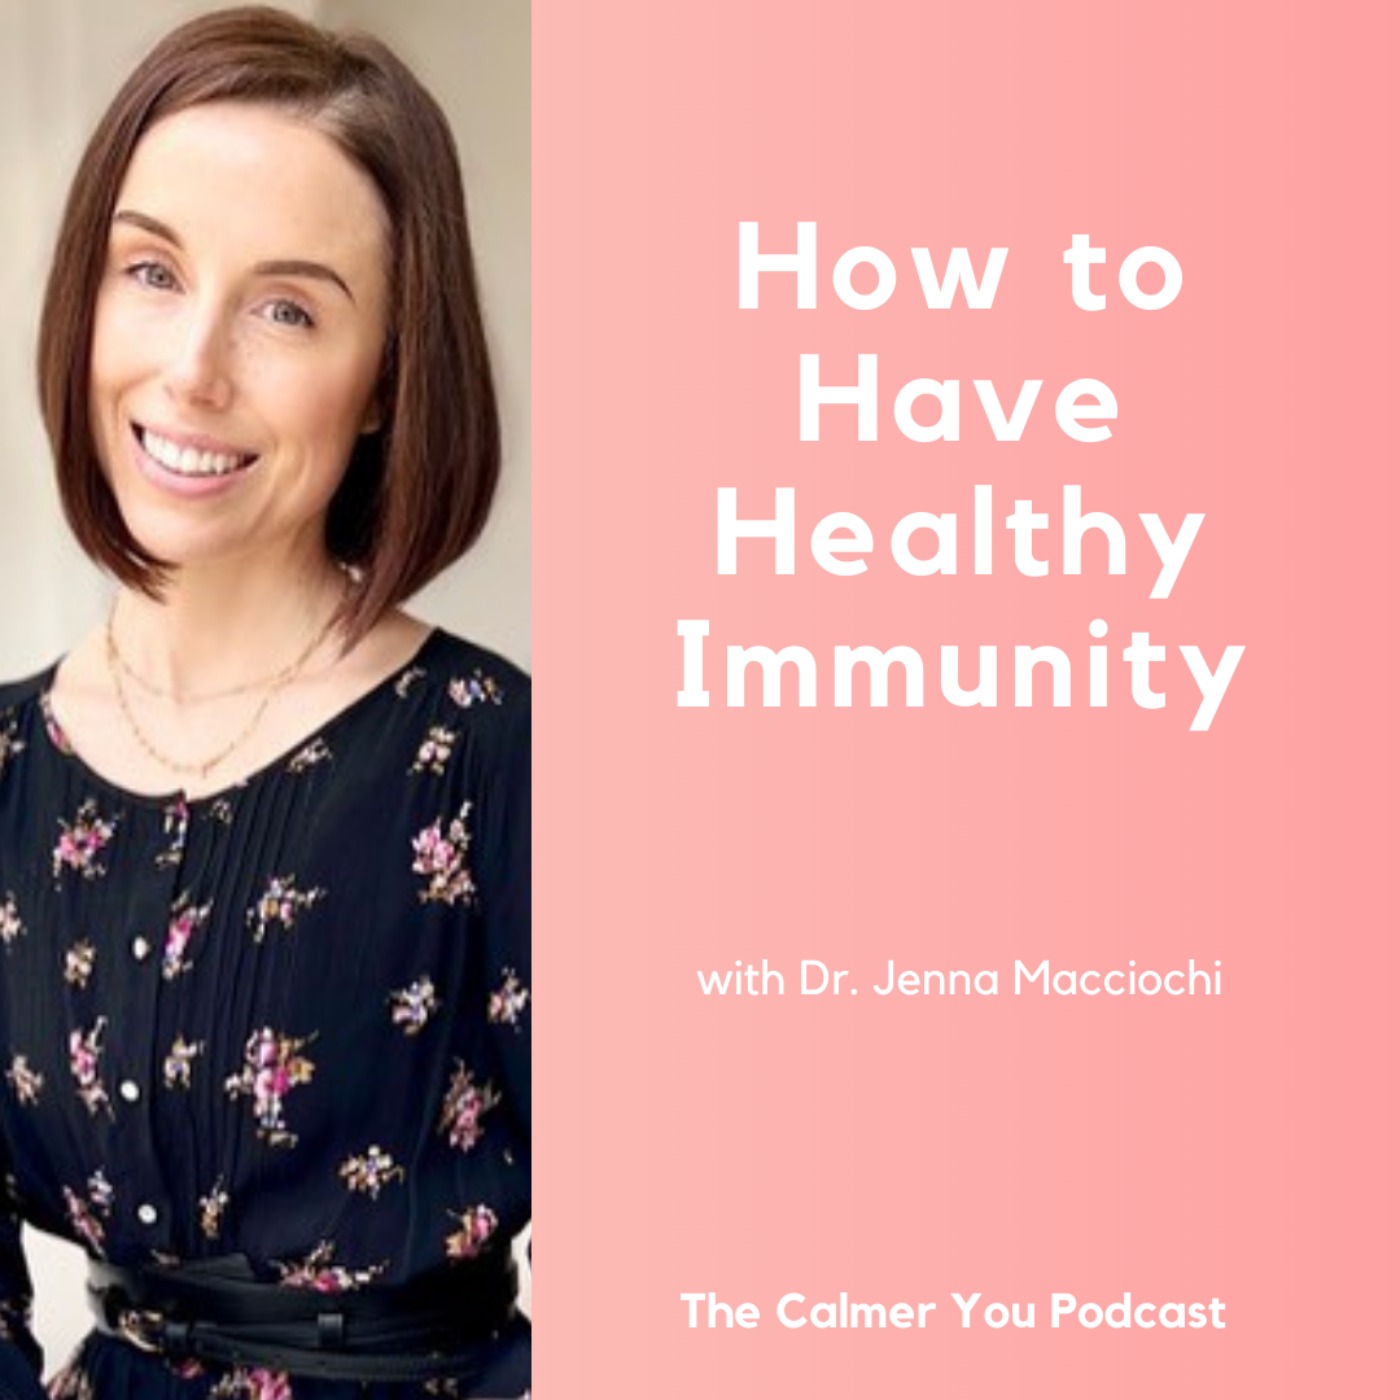 Ep 182. How to Have Healthy Immunity with Dr. Jenna Macciochi